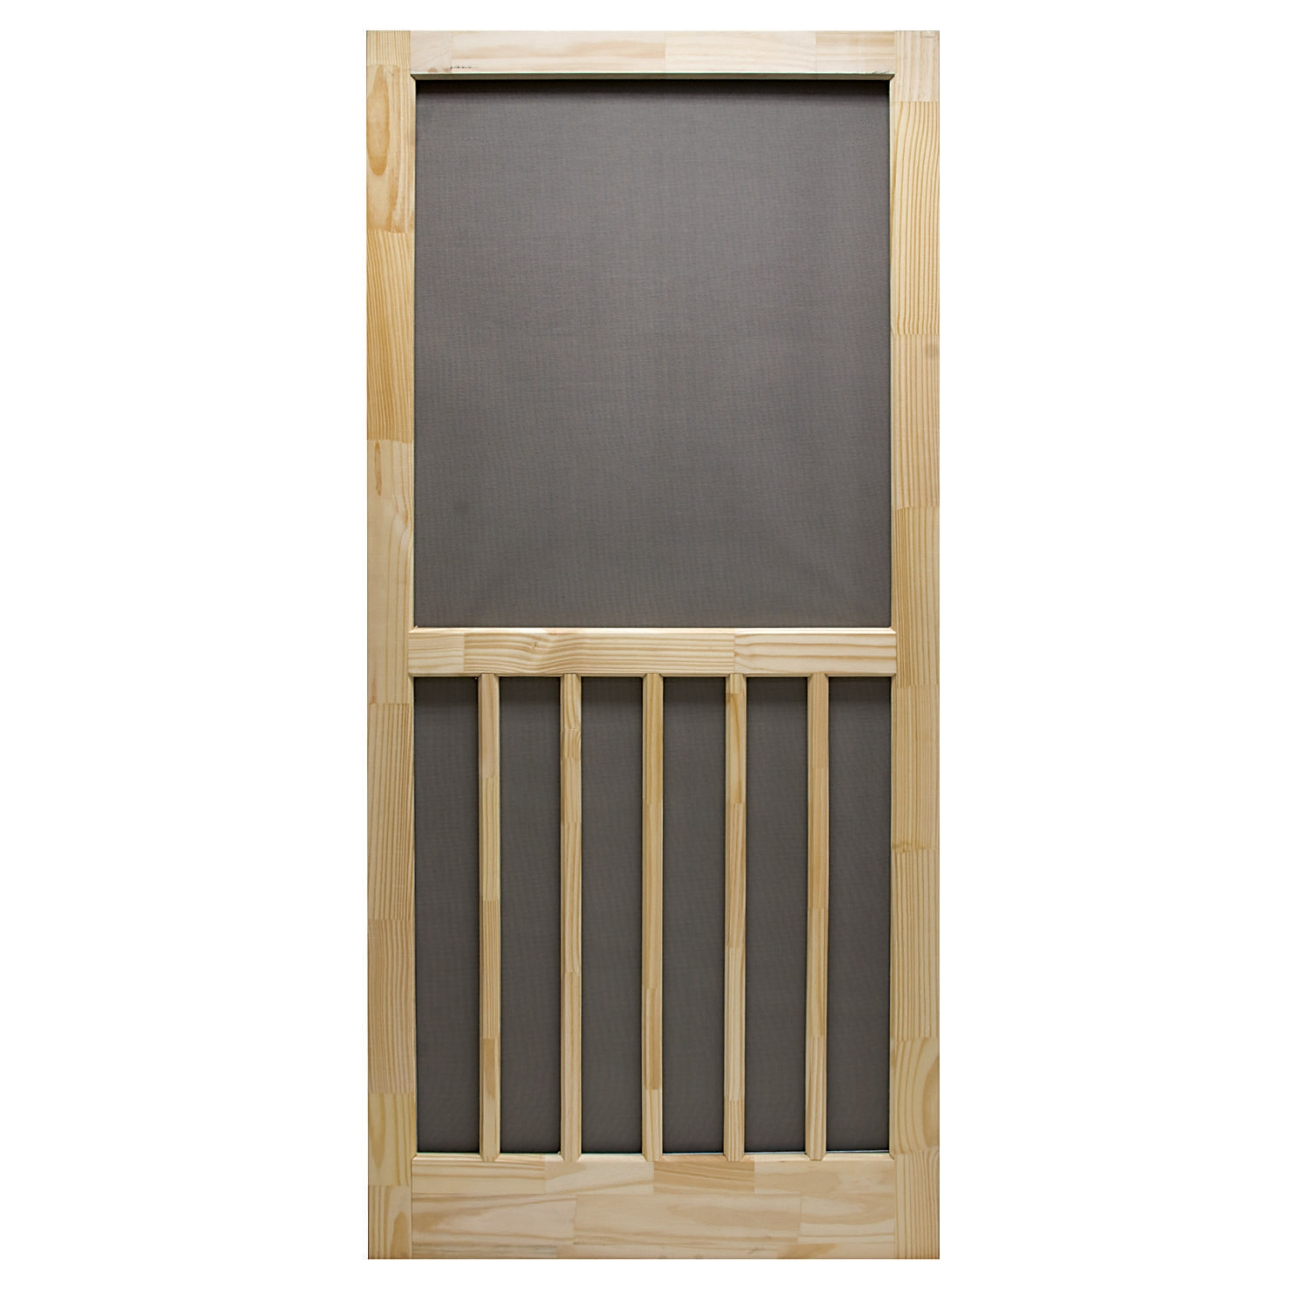 Wooden Moving Door Home Design Inside with size 1305 X 1305